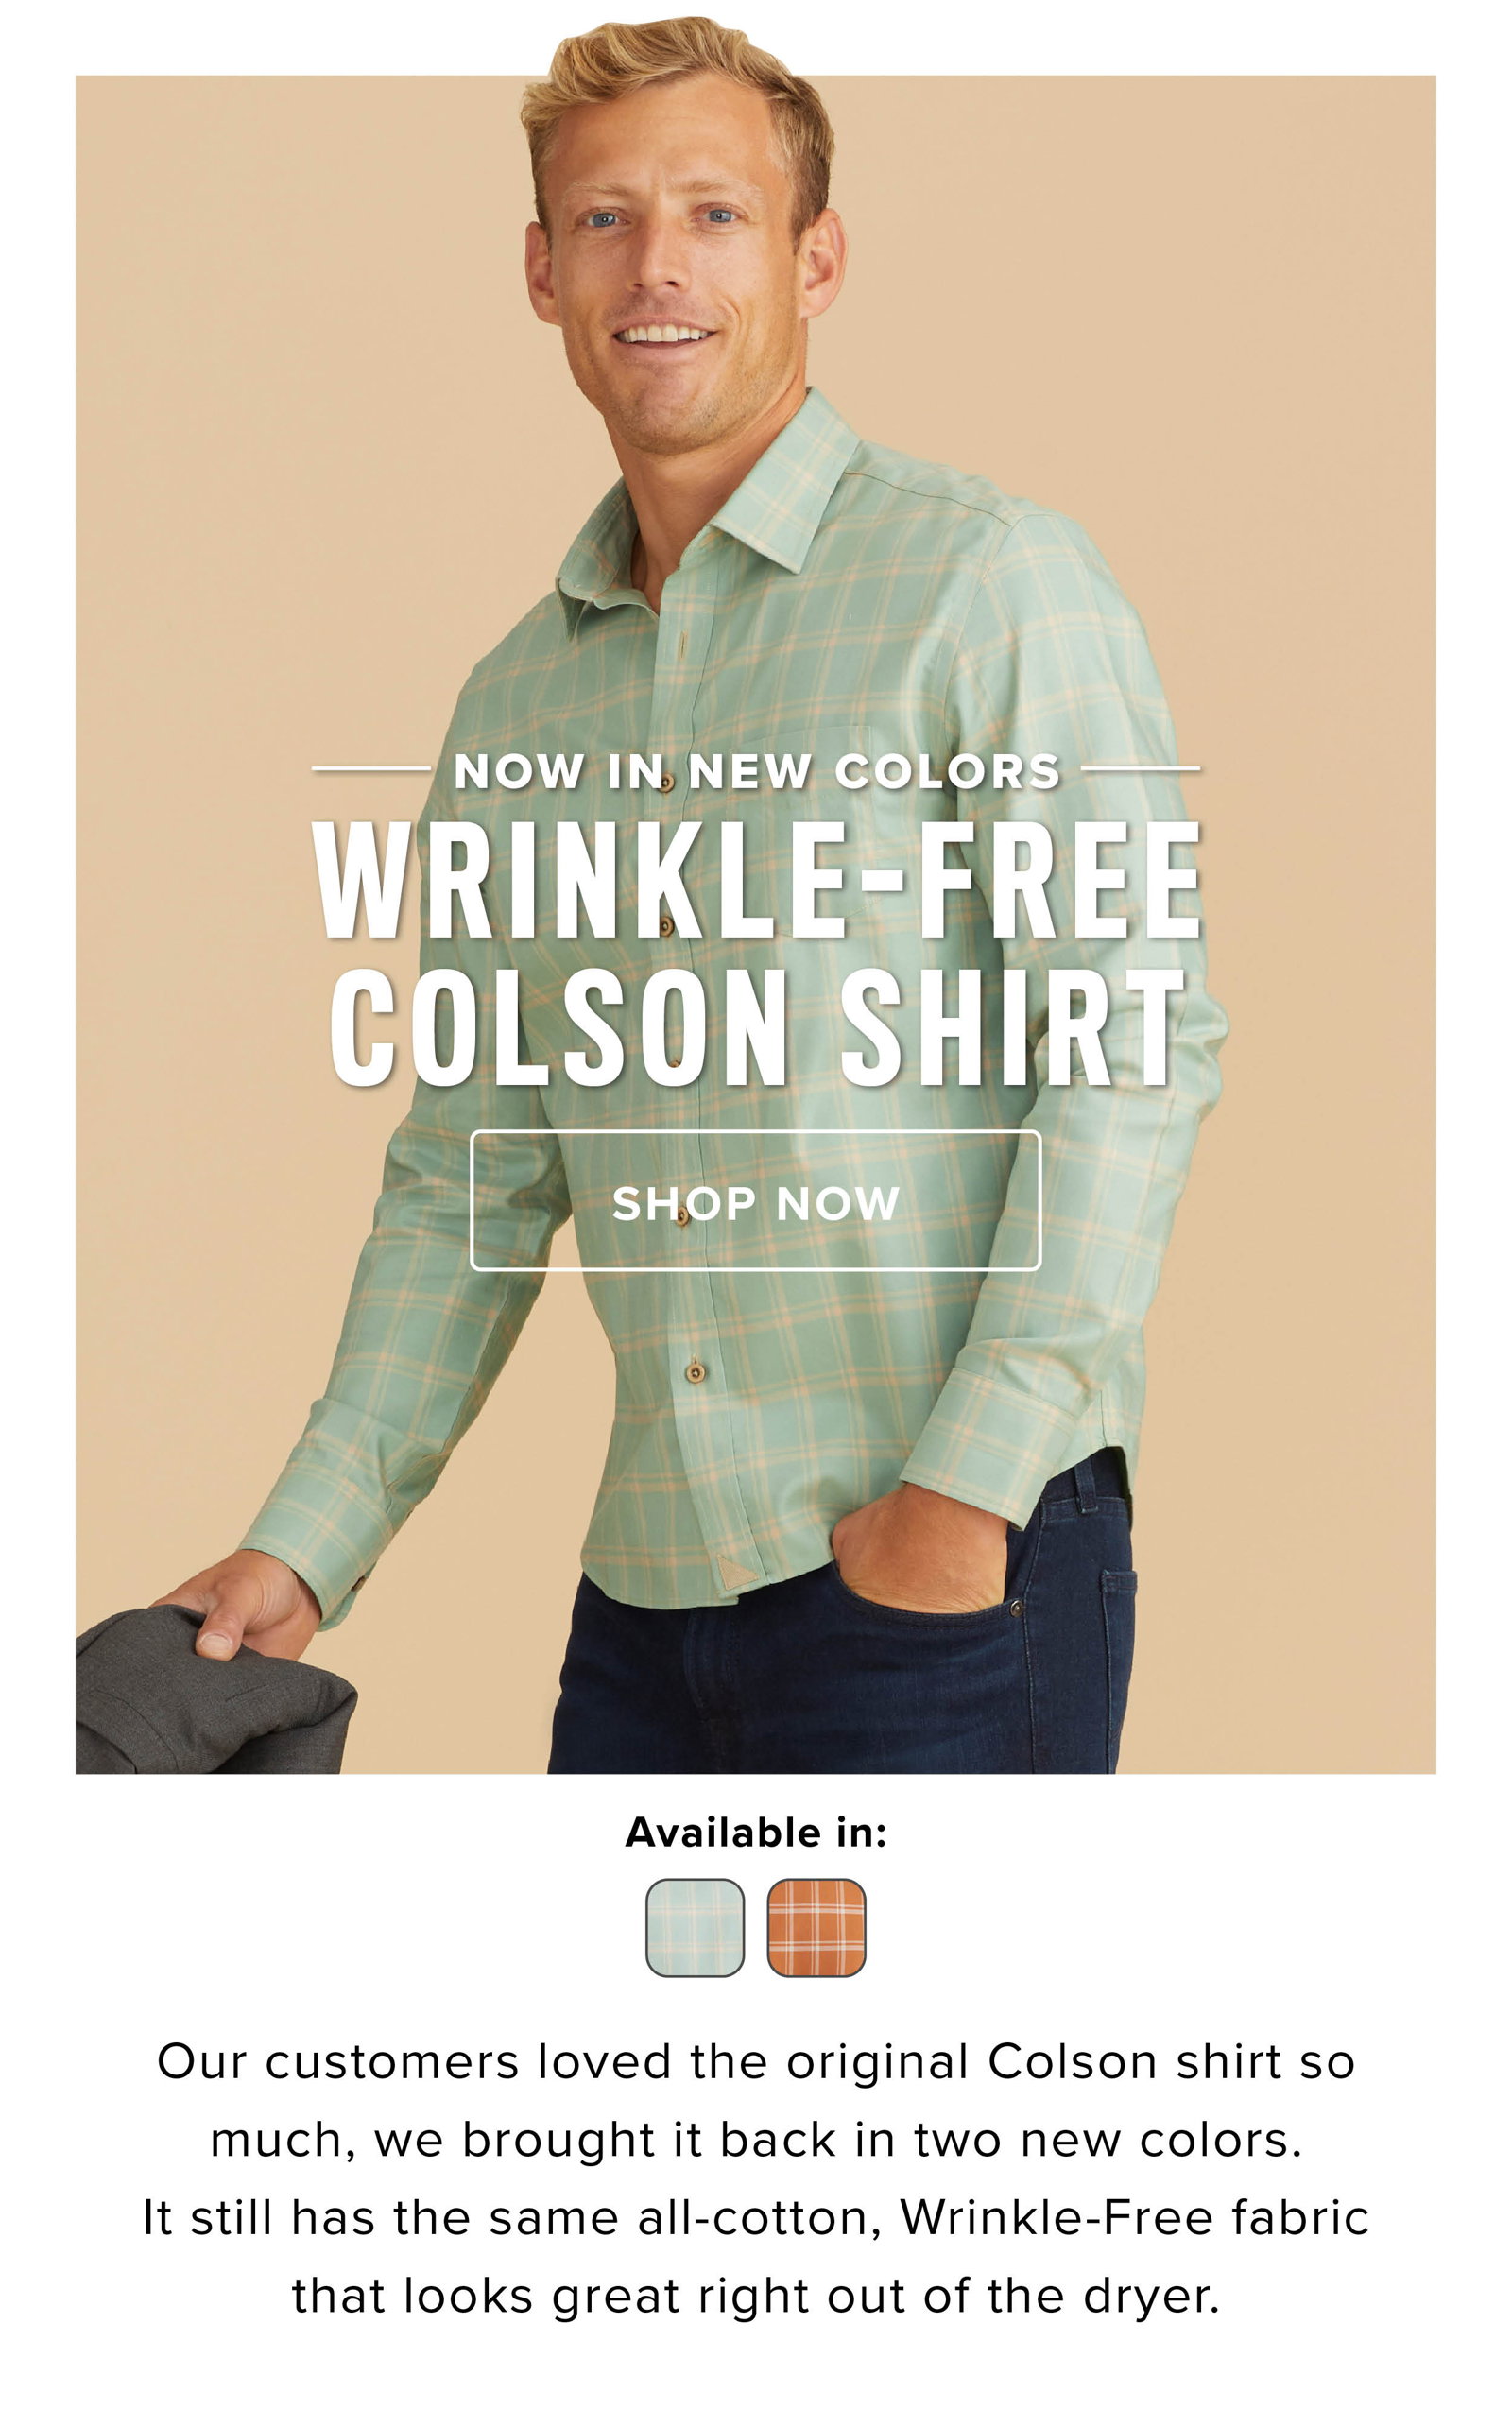 UNTUCKit: Introducing the Wrinkle-Free Colson Shirt